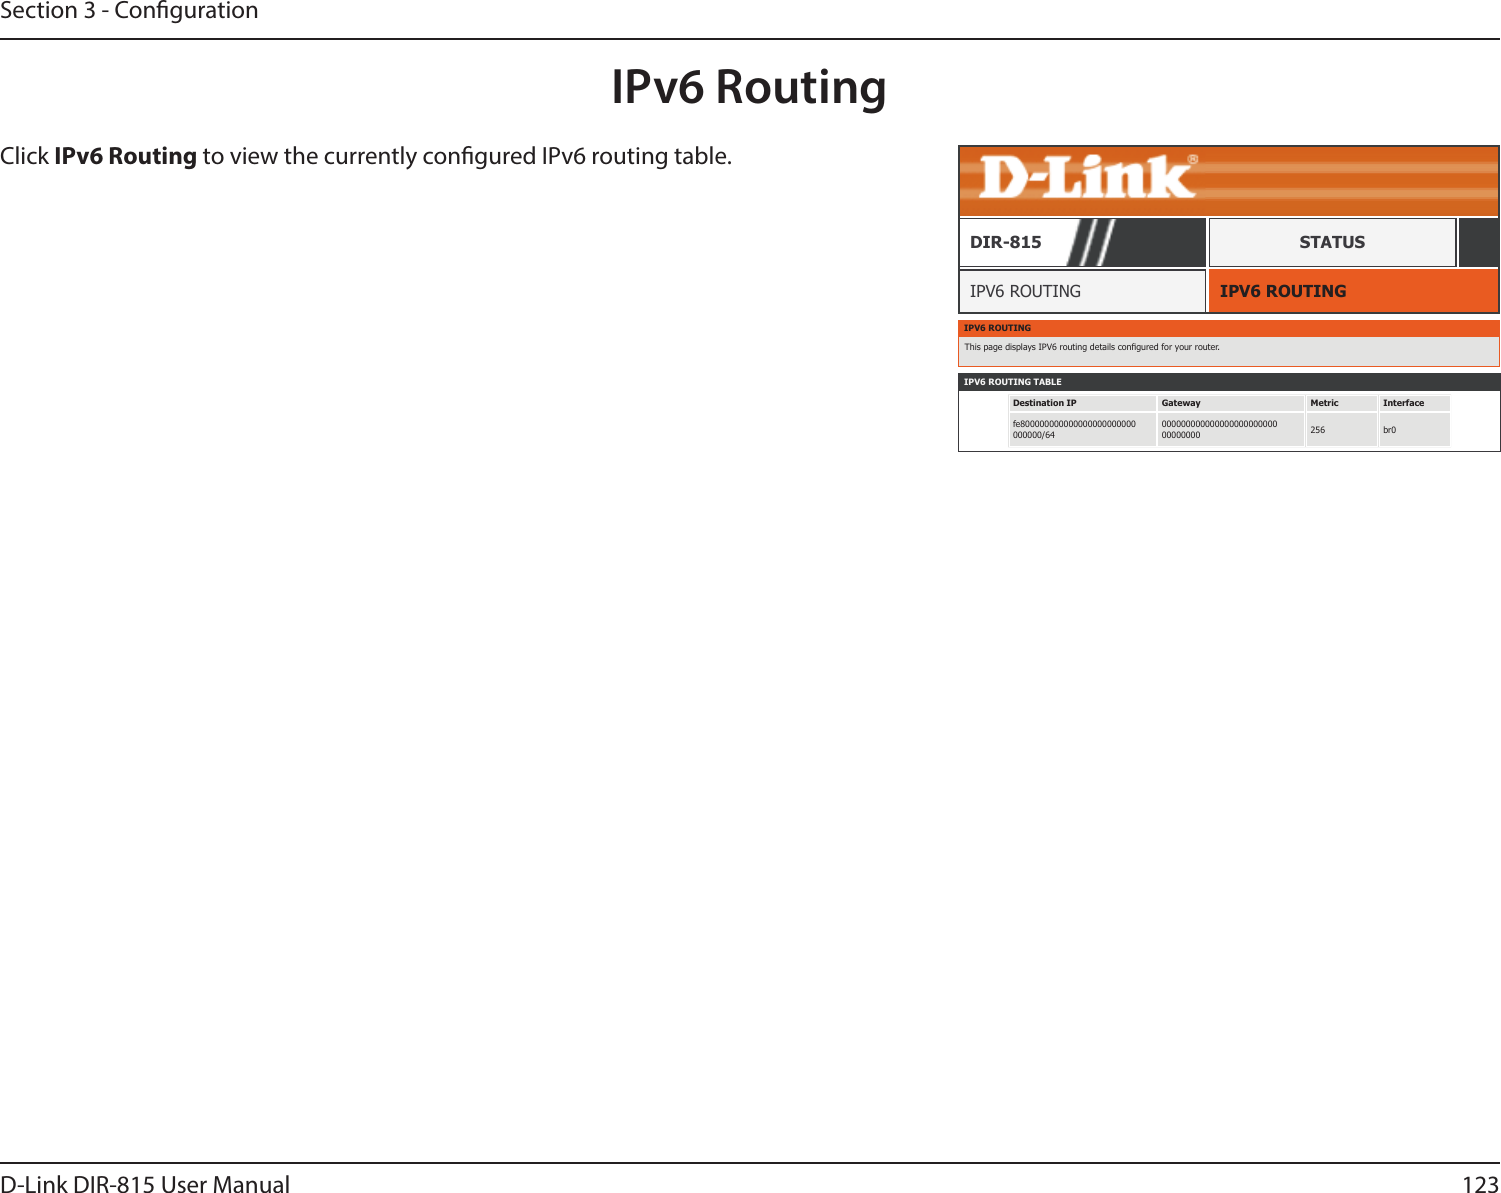 123D-Link DIR-815 User ManualSection 3 - CongurationIPv6 RoutingIPV6 ROUTINGIPV6 ROUTINGDIR-815 STATUSIPV6 ROUTINGThis page displays IPV6 routing details congured for your router.IPV6 ROUTING TABLEDestination IP Gateway Metric Interfacefe800000000000000000000000000000/6400000000000000000000000000000000 256 br0Click IPv6 Routing to view the currently congured IPv6 routing table.